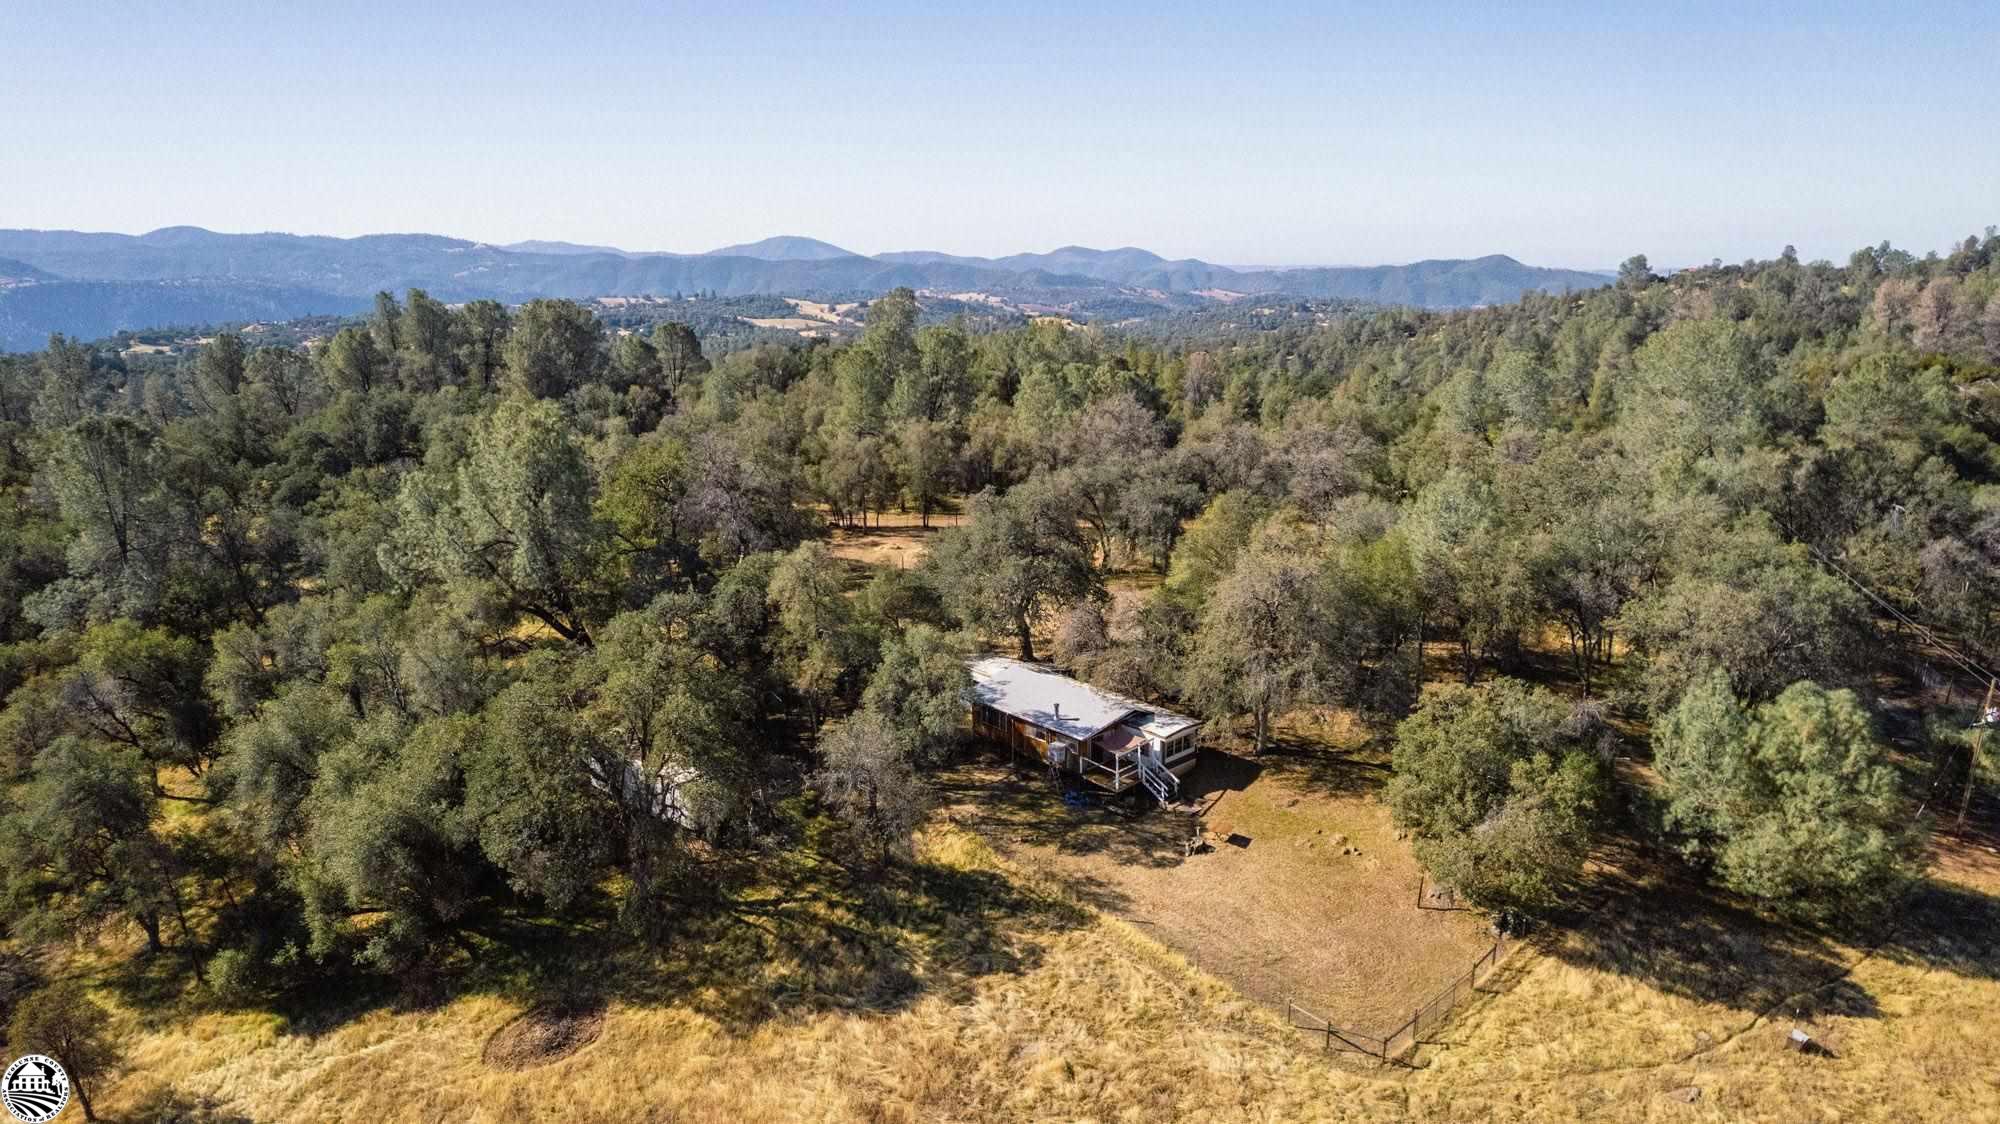 Opportunity on desirable fenced horse property! Can't find your dream home build it on over 10 peaceful acres in the Foothills of Tuolumne County~Or~ bring your TLC move into Modular home with an addition, wood burning stove and enjoy the peaceful setting and views from your back deck. Close to Yosemite two hours from Bay Area. As is sale.